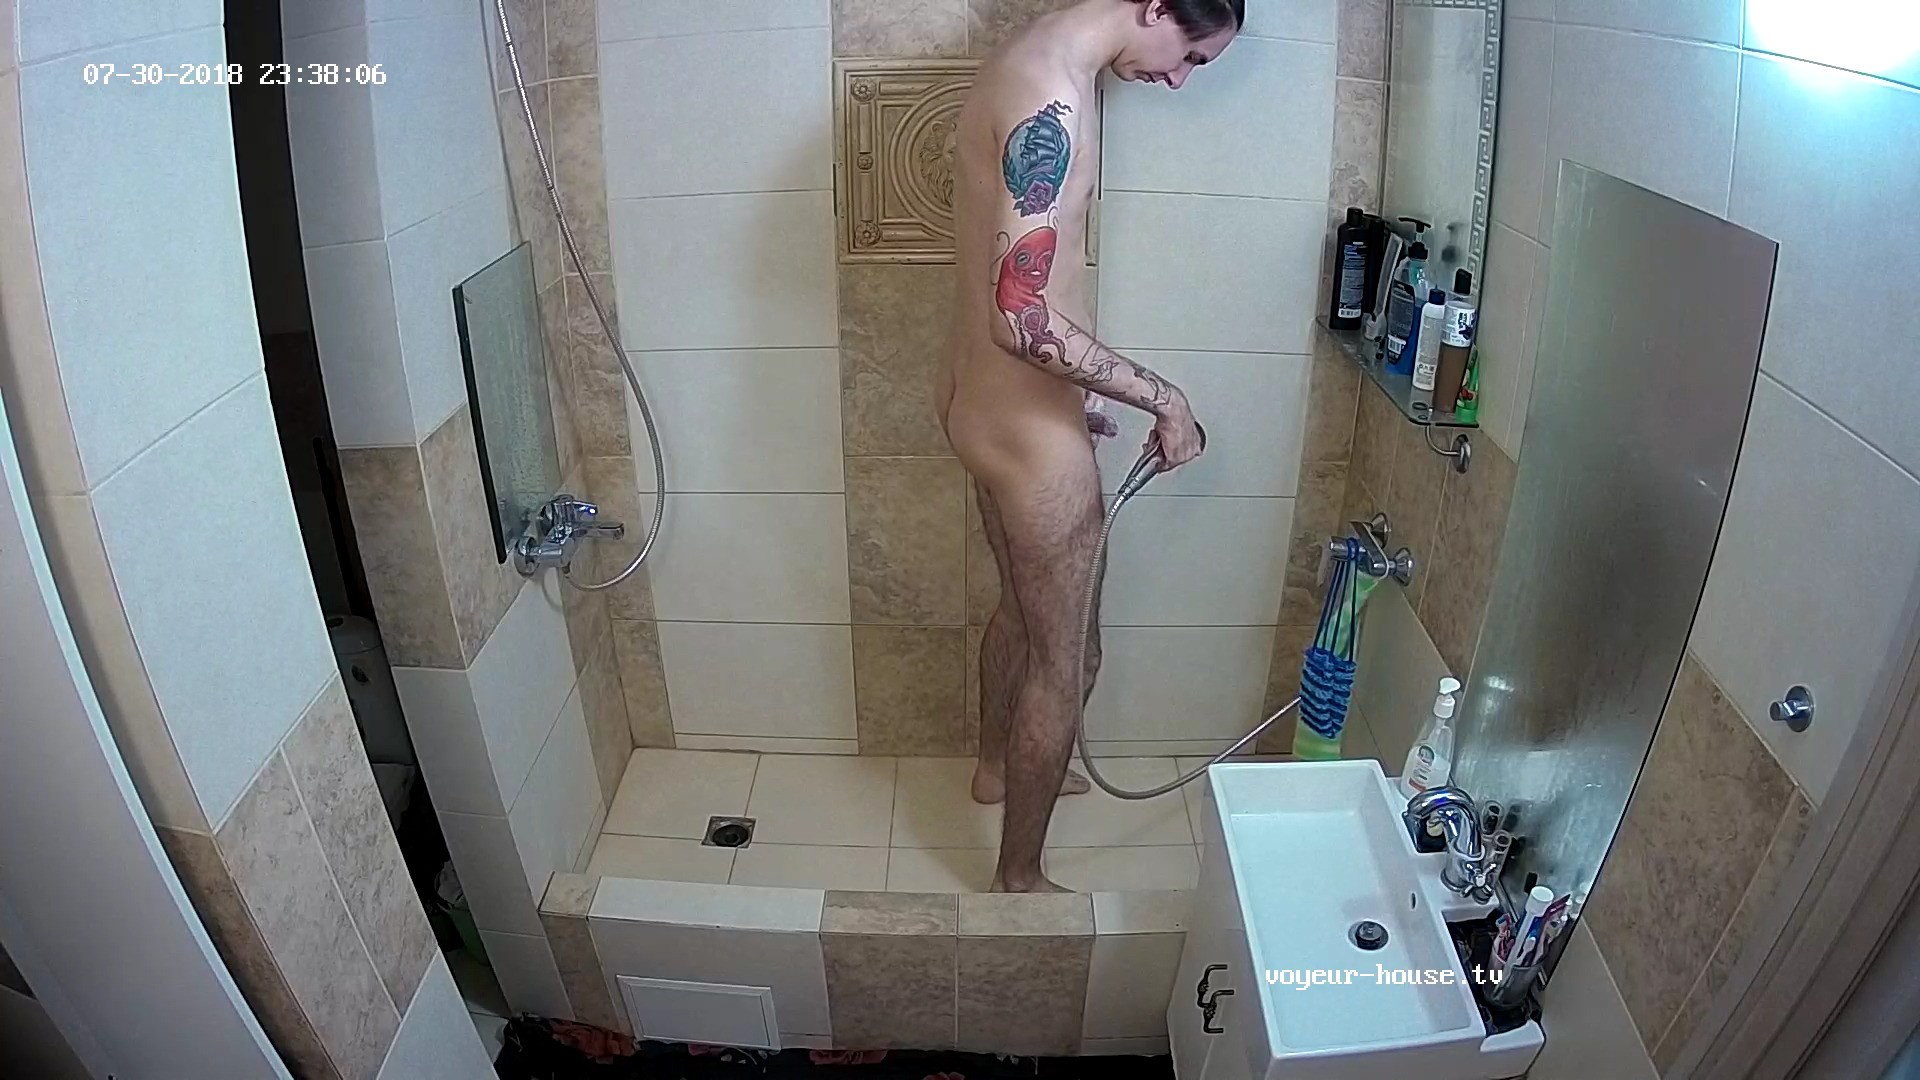 Guest guy quick shower 30th Jul 2018